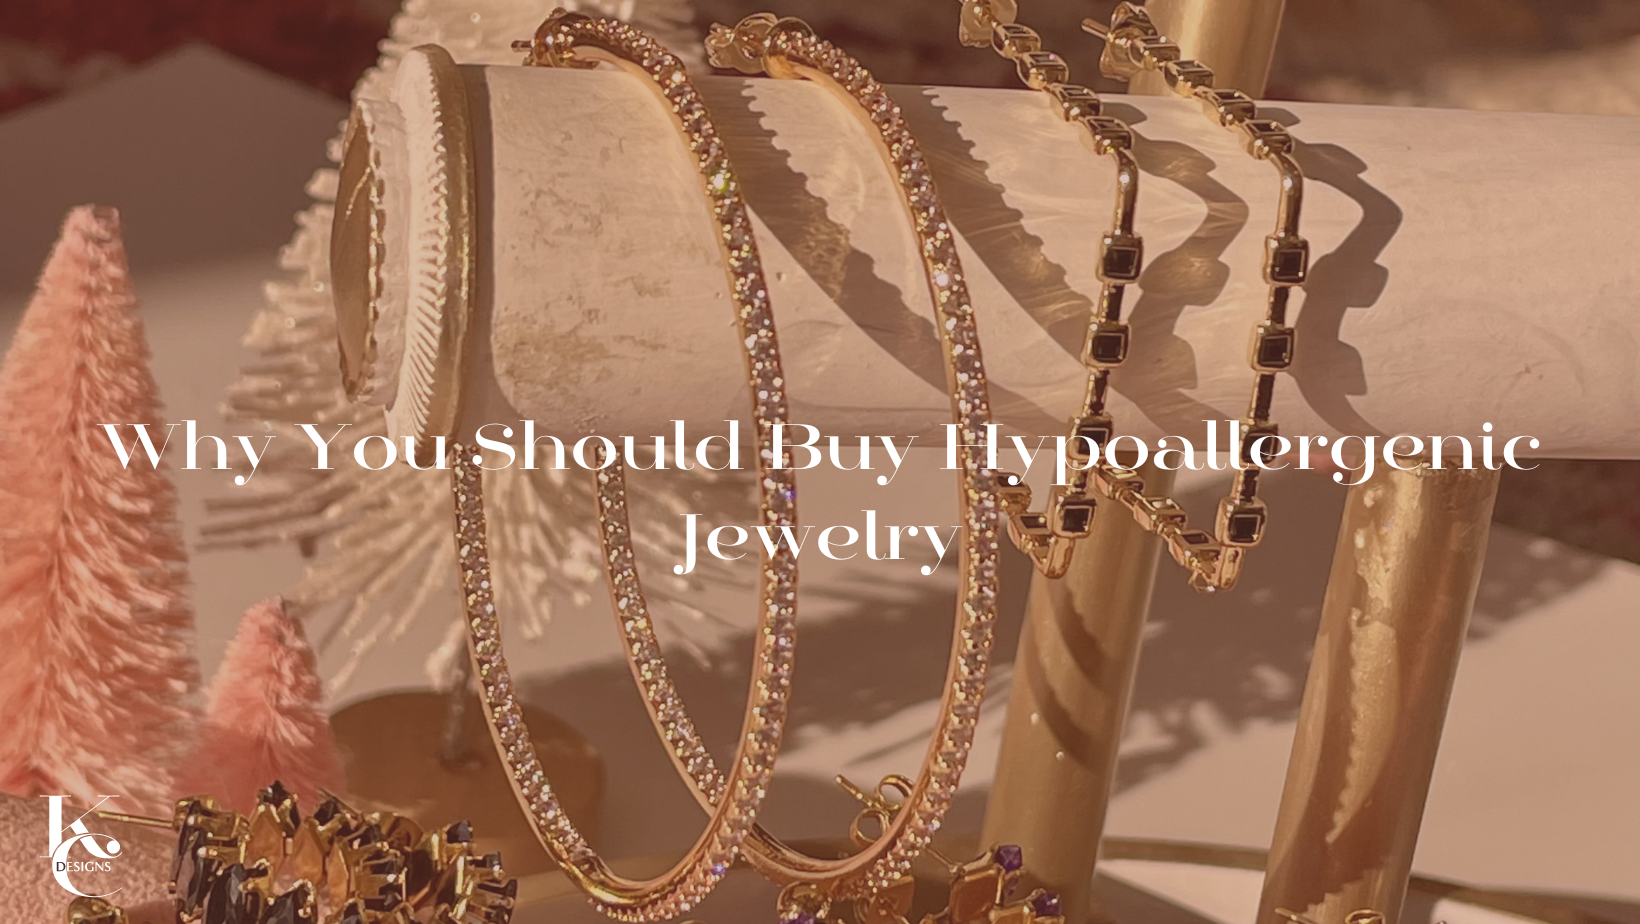 Why You Should Buy Hypoallergenic Jewelry